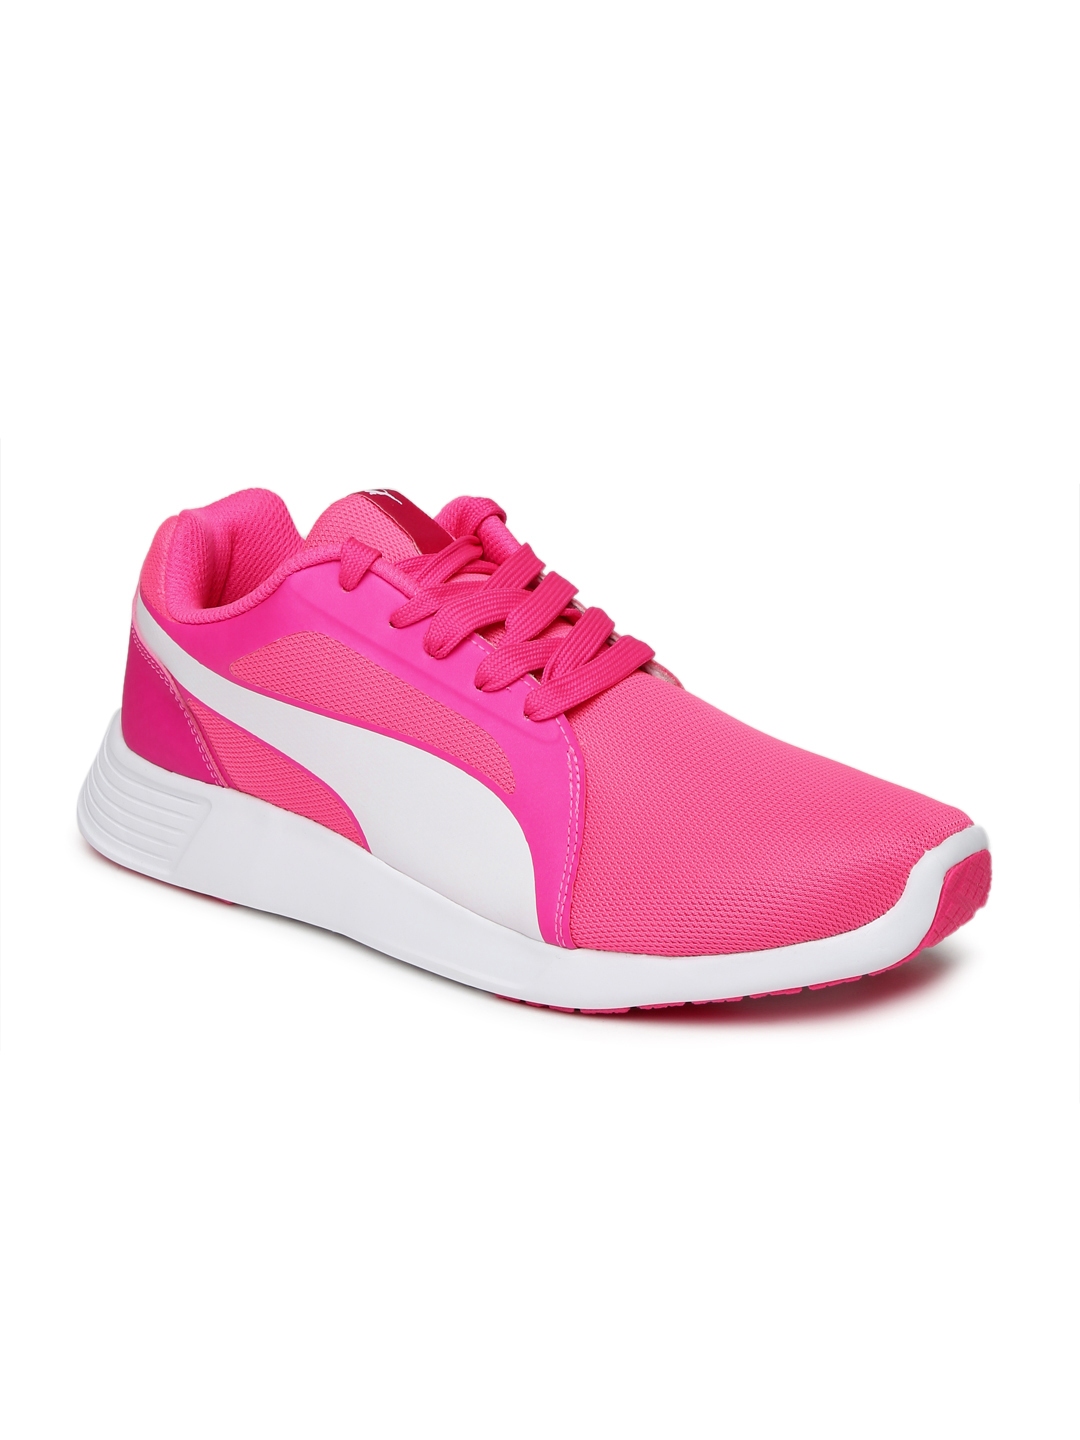 Buy Puma Women Pink ST Trainer Evo Running Shoes - Sports Shoes for ...